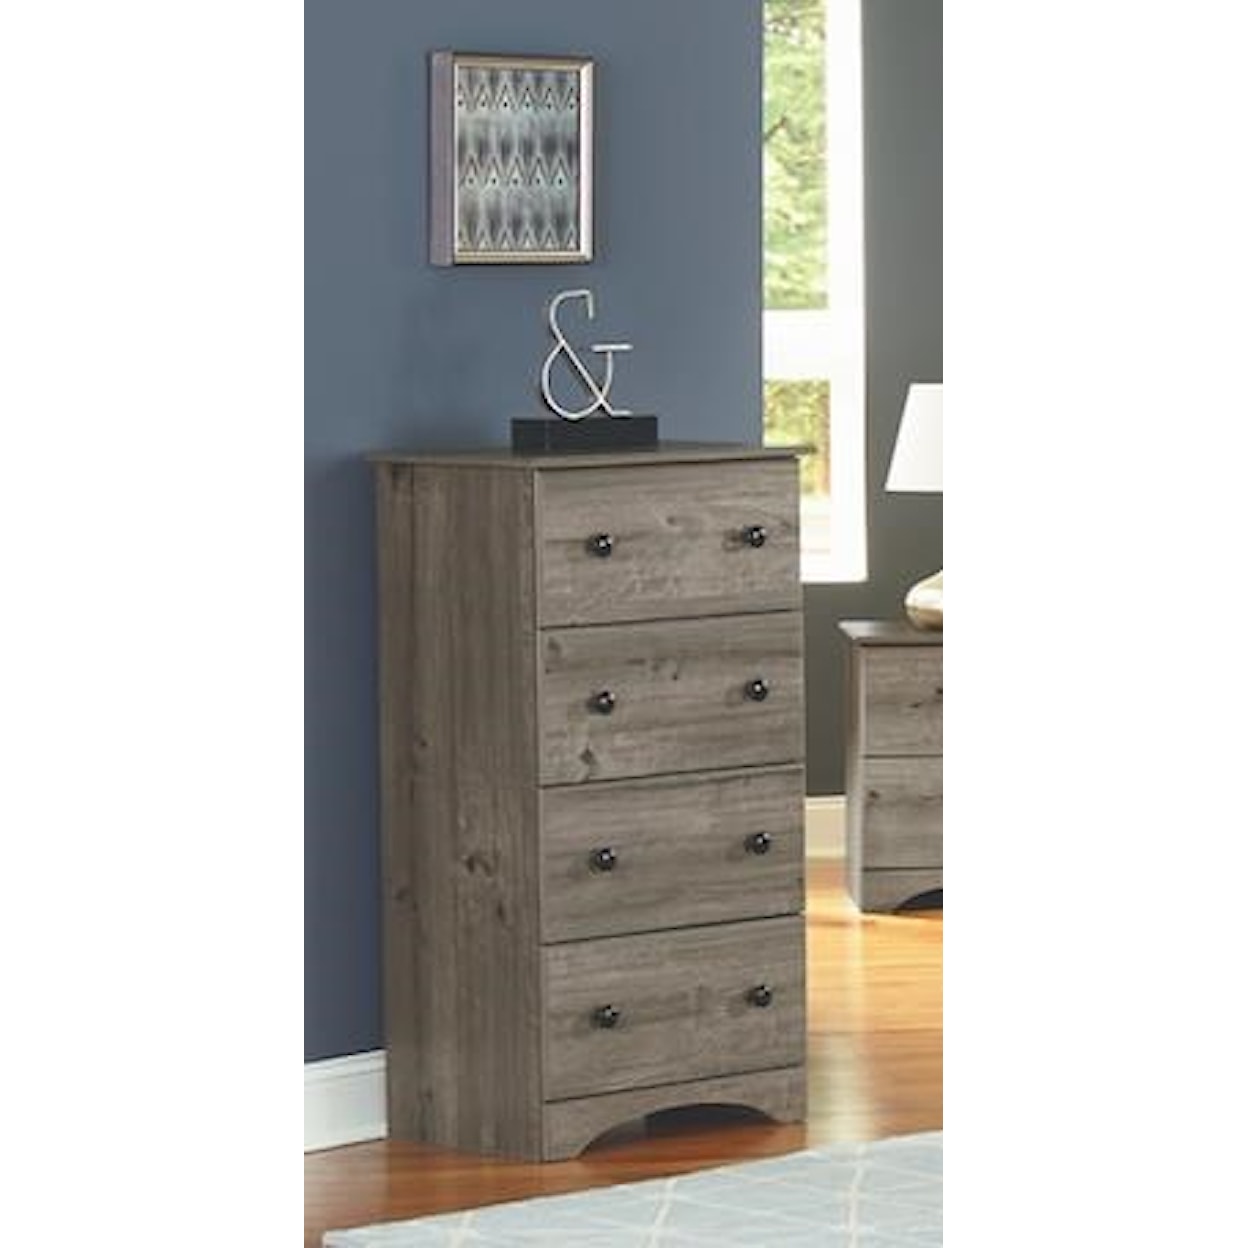 Perdue 13000 Series 3 Piece Full Bookcase Headboard Group